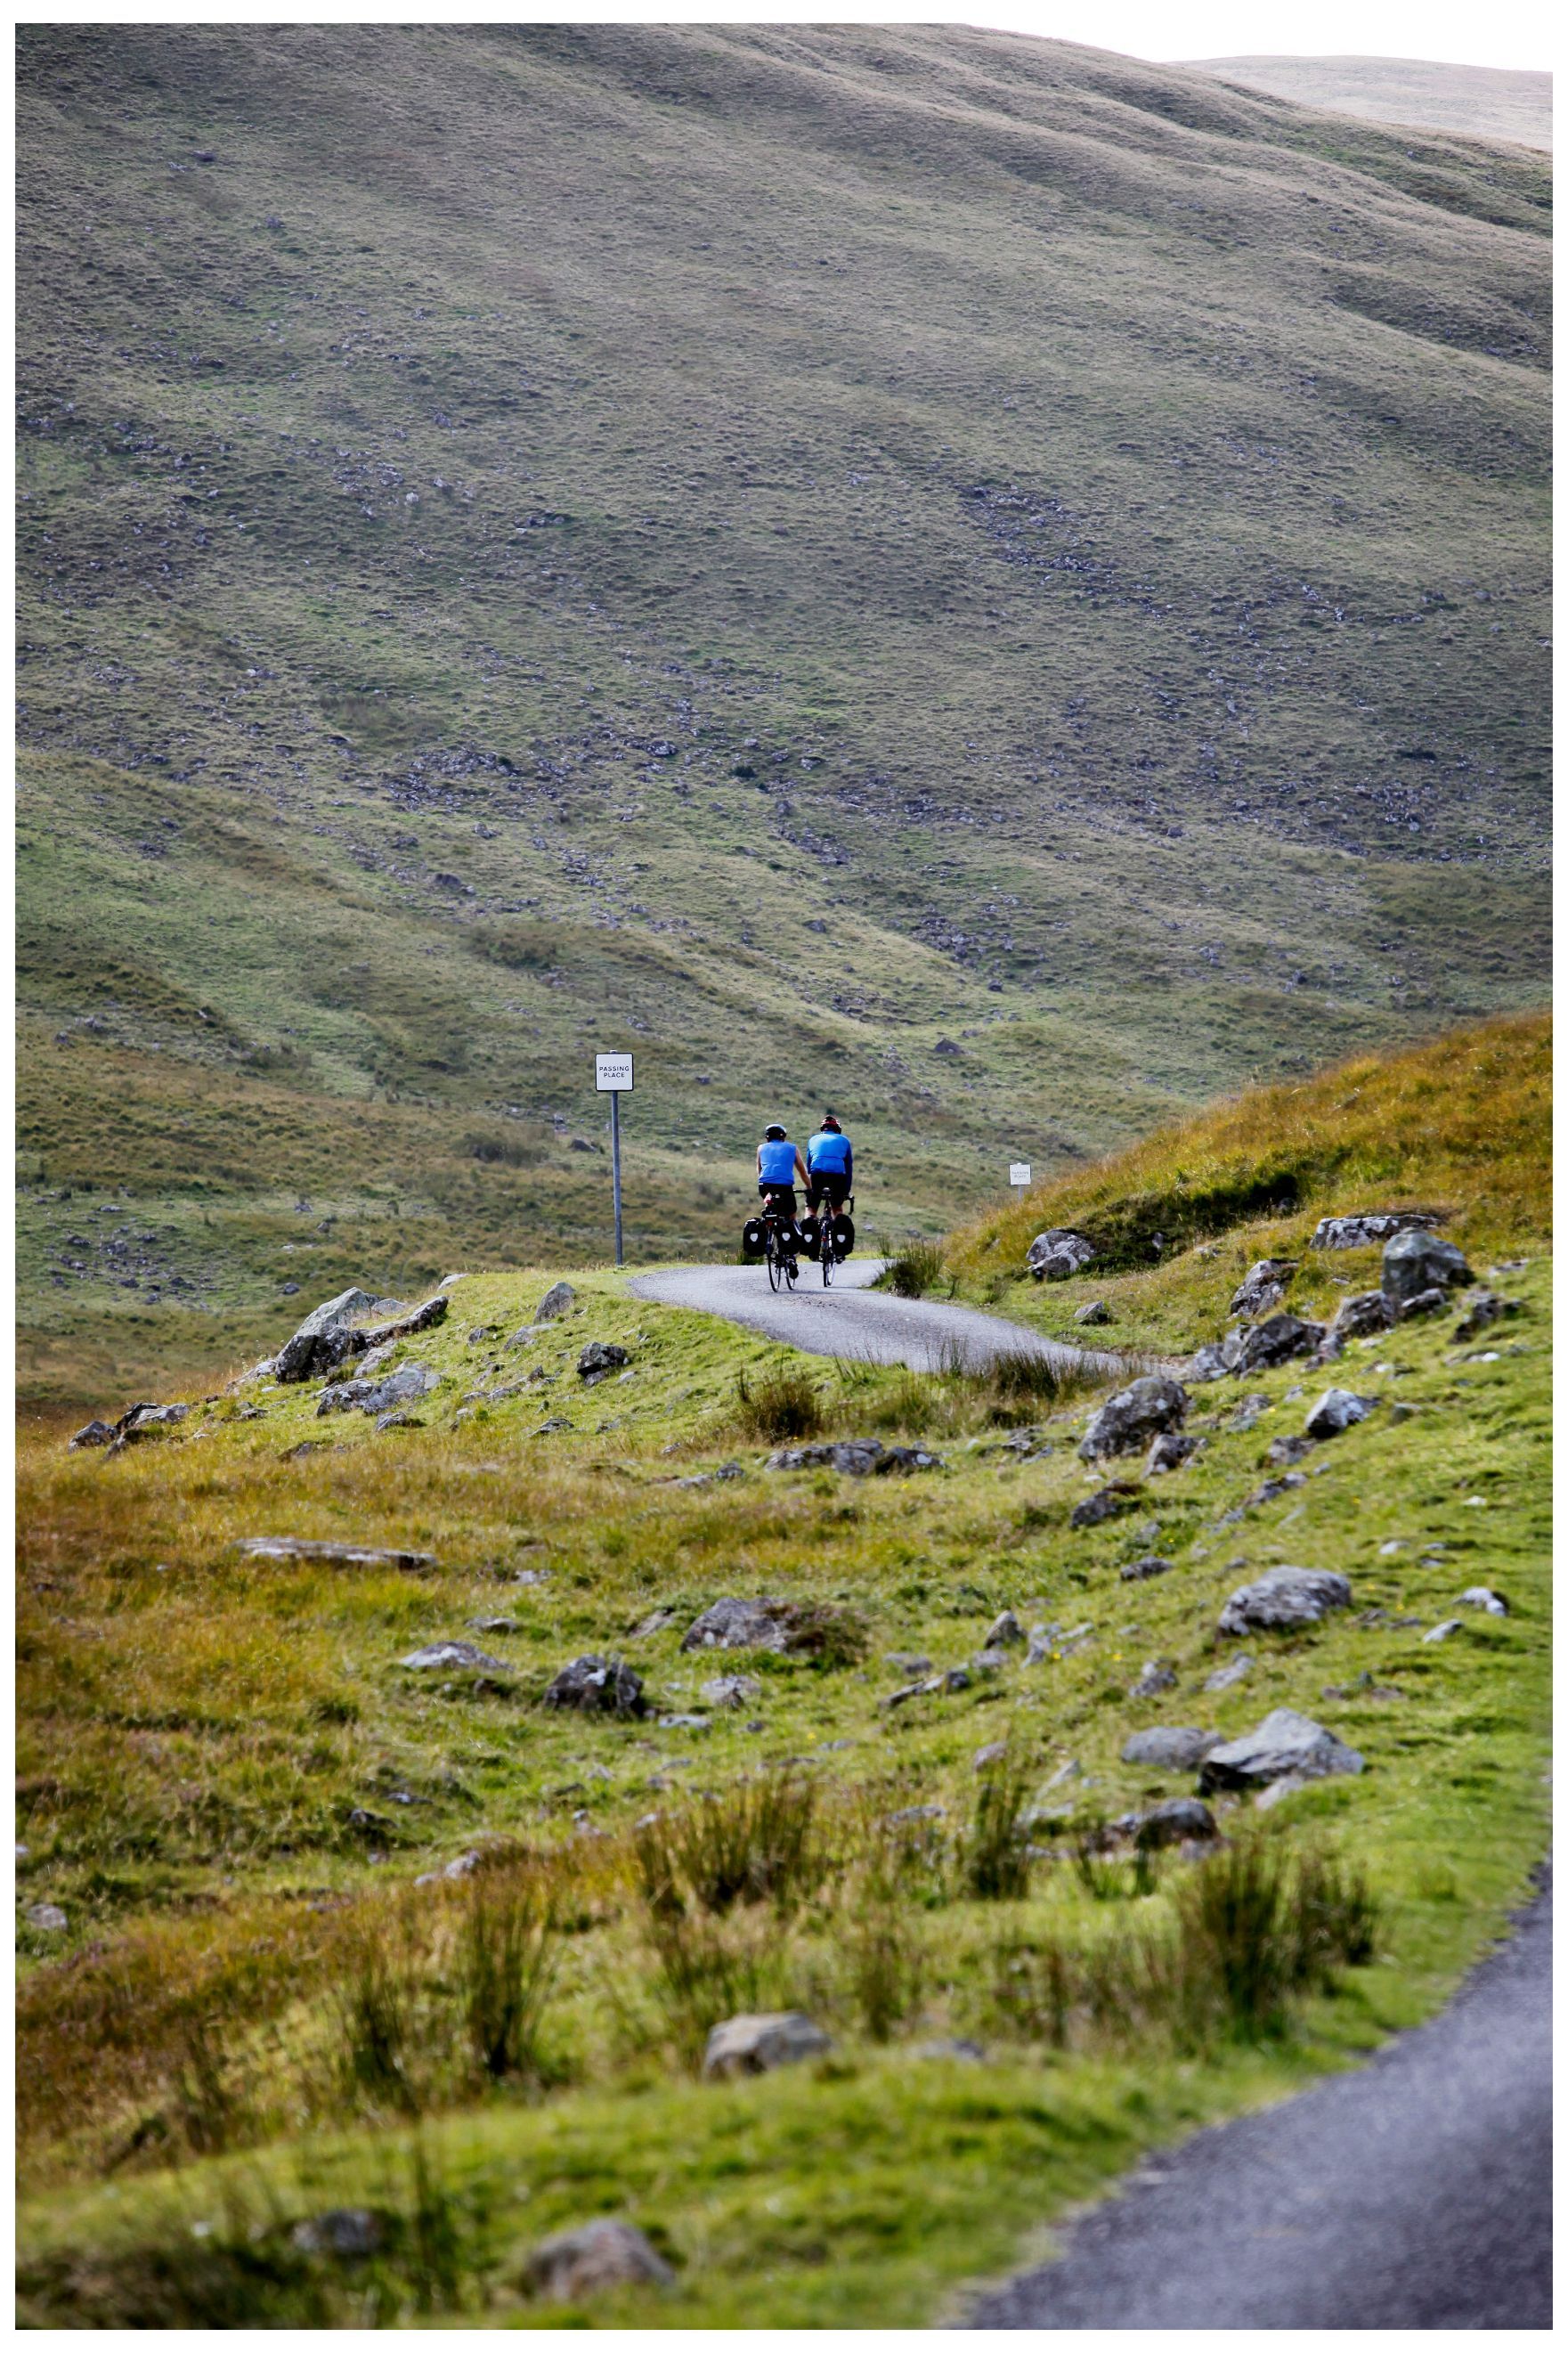 Cyclists on a winding road in the south of Scotland. Credit: Paul Dodds